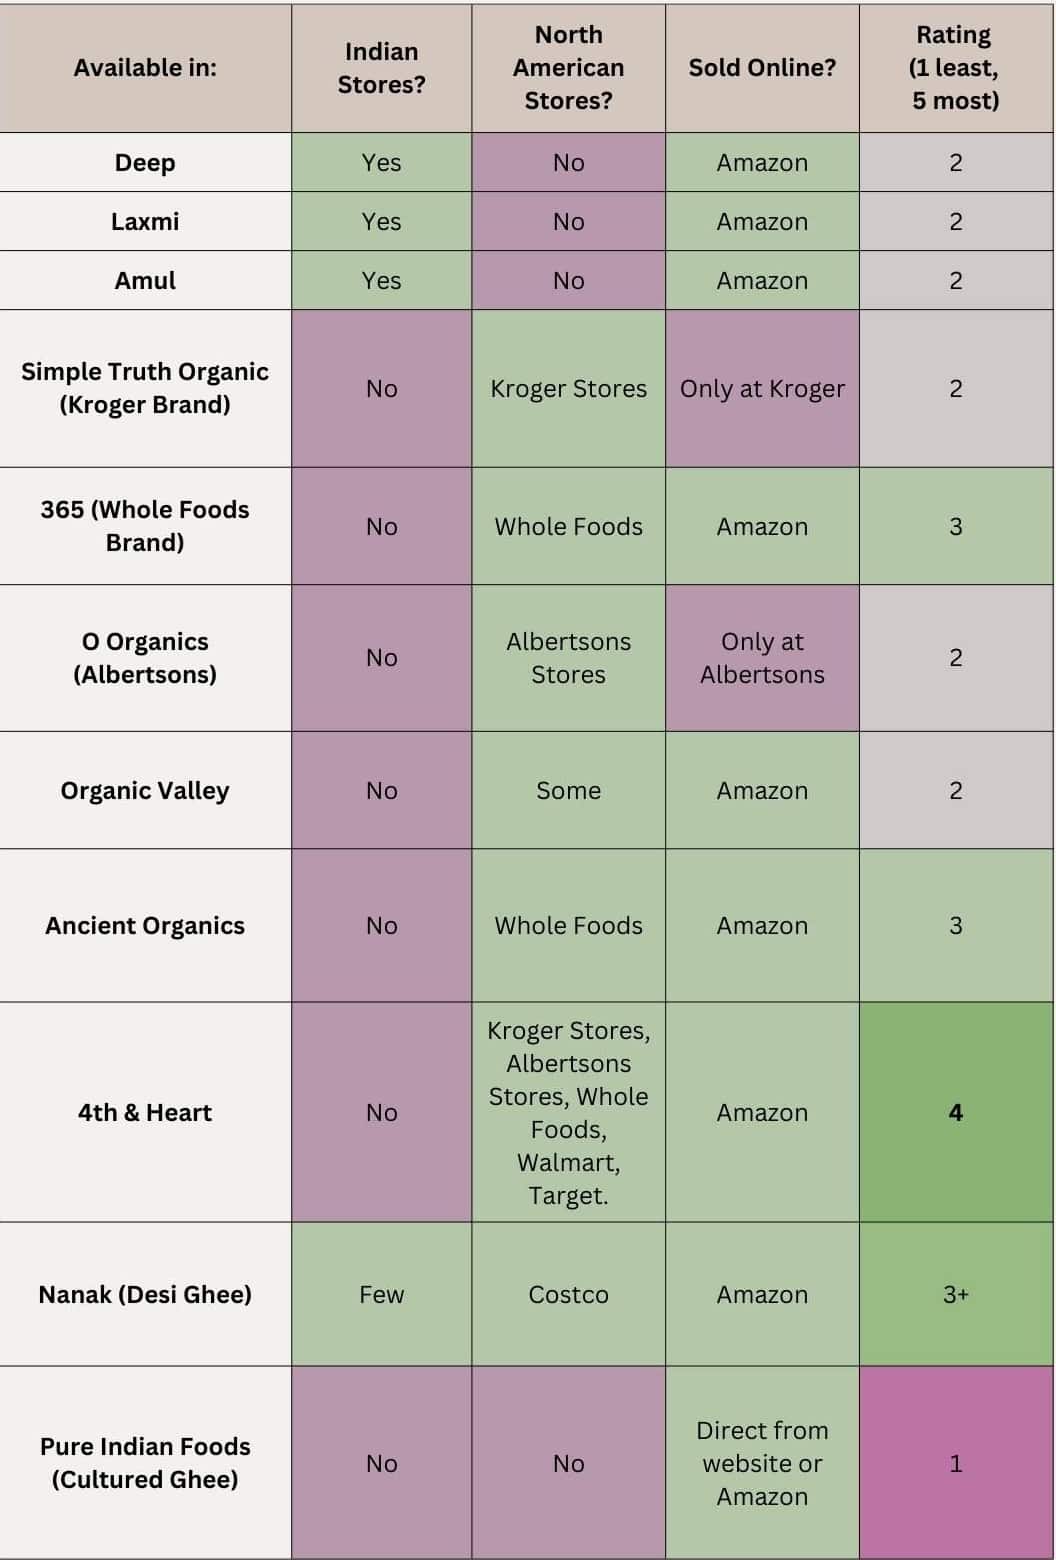 A comparison of various ghee brands based on availability in Indian stores, North American stores, and online platforms, along with their corresponding ratings on a scale of 1 to 5, where 1 indicates the least availability and 5 indicates the most availability. Each row represents a different brand. Deep: Available in Indian stores, not in North American stores, sold on Amazon, with a rating of 2. Laxmi: Available in Indian stores, not in North American stores, sold on Amazon, with a rating of 2. Amul: Available in Indian stores, not in North American stores, sold on Amazon, with a rating of 2. Simple Truth Organic (Kroger Brand): Not available in Indian stores, available in Kroger stores (Kroger, QFC, Harris Teeter, etc.), can be ordered online from the store, with a rating of 2. 365 (Whole Foods Brand): Not available in Indian stores, available in Whole Foods, sold on Amazon, with a rating of 3. O Organics (Albertsons): Not available in Indian stores, available in Albertsons stores (Safeway, etc.), can be ordered online from the store, with a rating of 2. Organic Valley: Not available in Indian stores, available in some stores, sold on Amazon, with a rating of 2. Ancient Organics: Not available in Indian stores, available in Whole Foods, sold on Amazon, with a rating of 3. 4th & Heart: Not available in Indian stores, available in Kroger stores, Albertsons stores, Whole Foods, Amazon, Walmart, Target, sold on Amazon, with a rating of 4 (most available). Nanak (Desi Ghee): Available in a few Indian stores, available in Costco, sold on Amazon, with a rating of 3. Pure Indian Foods (Cultured Ghee): Not available in Indian stores, not available in North American stores, can be purchased directly from the website or Amazon, with a rating of 1.